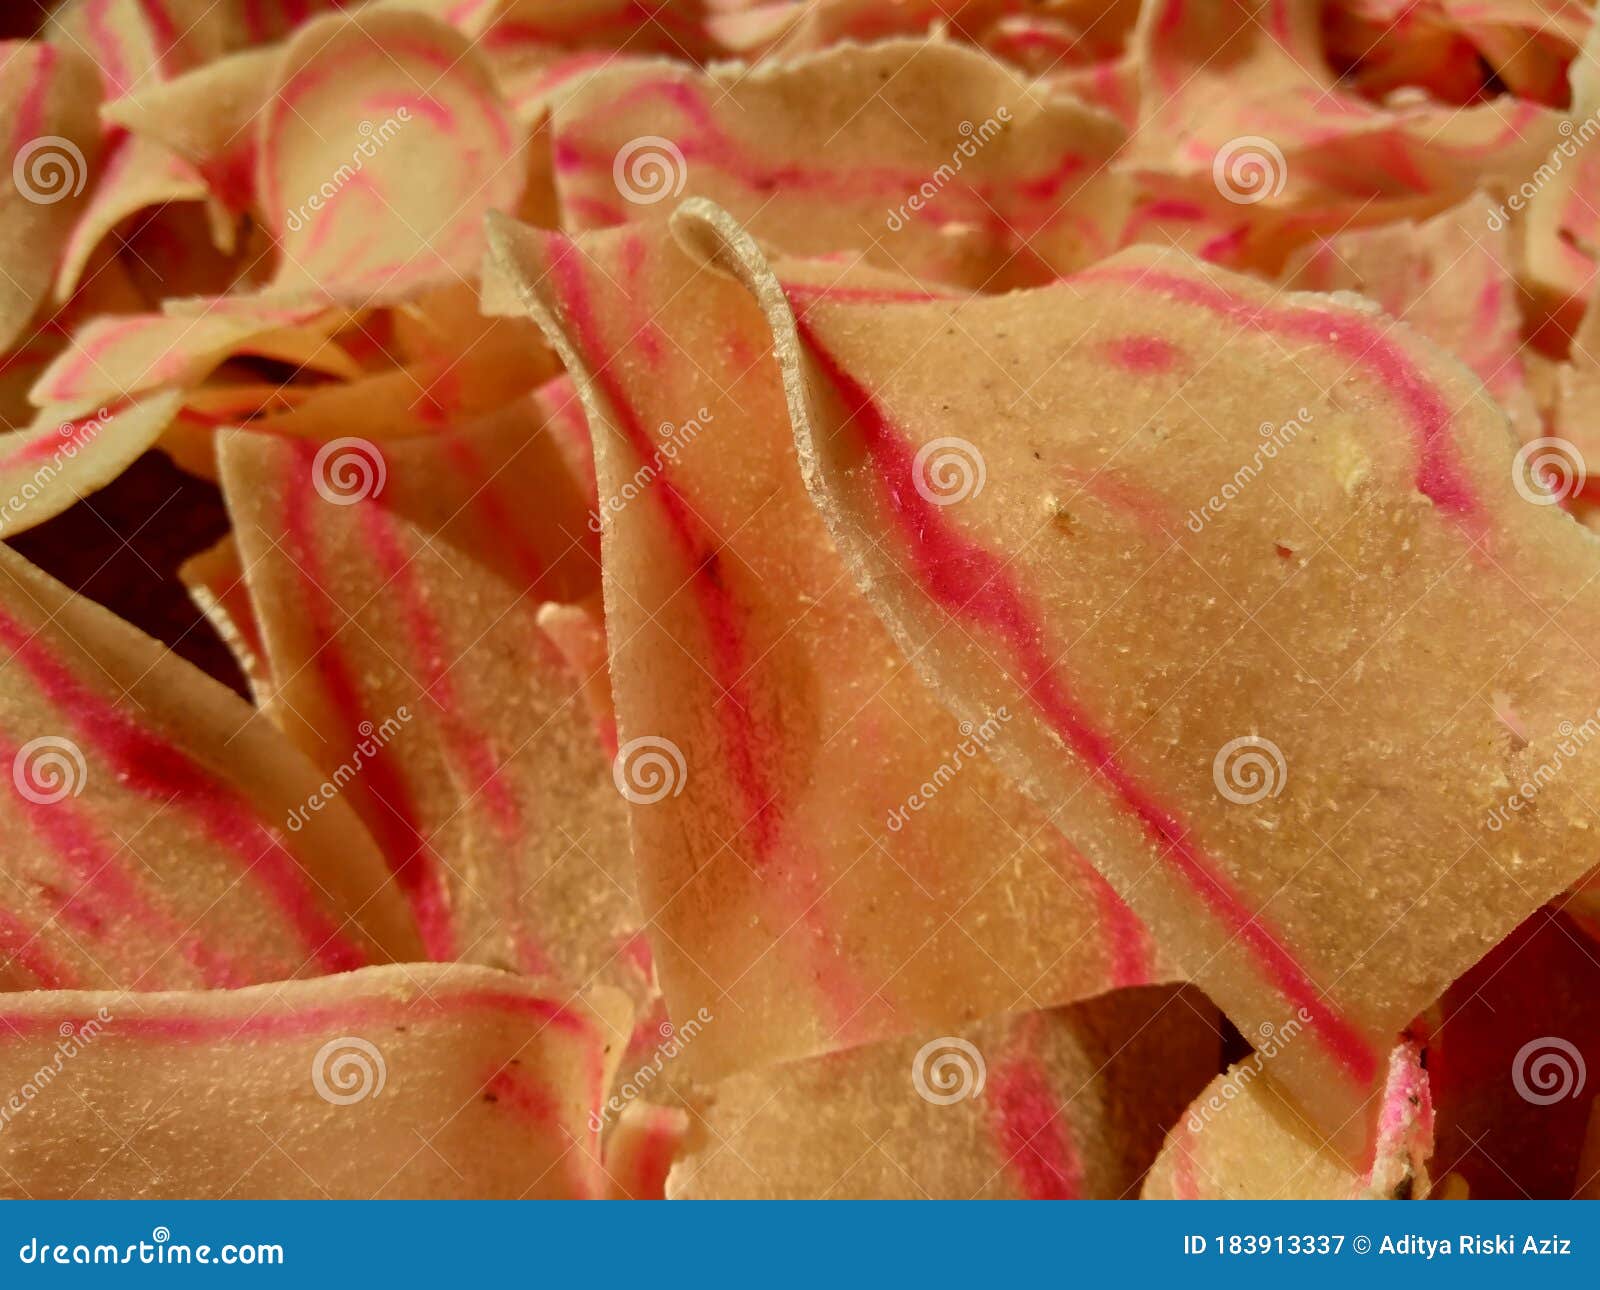 raw cassava chips. indonesia javanese called it as opak telo. traditional chips made off cassava. the taste is crunchy, savory,